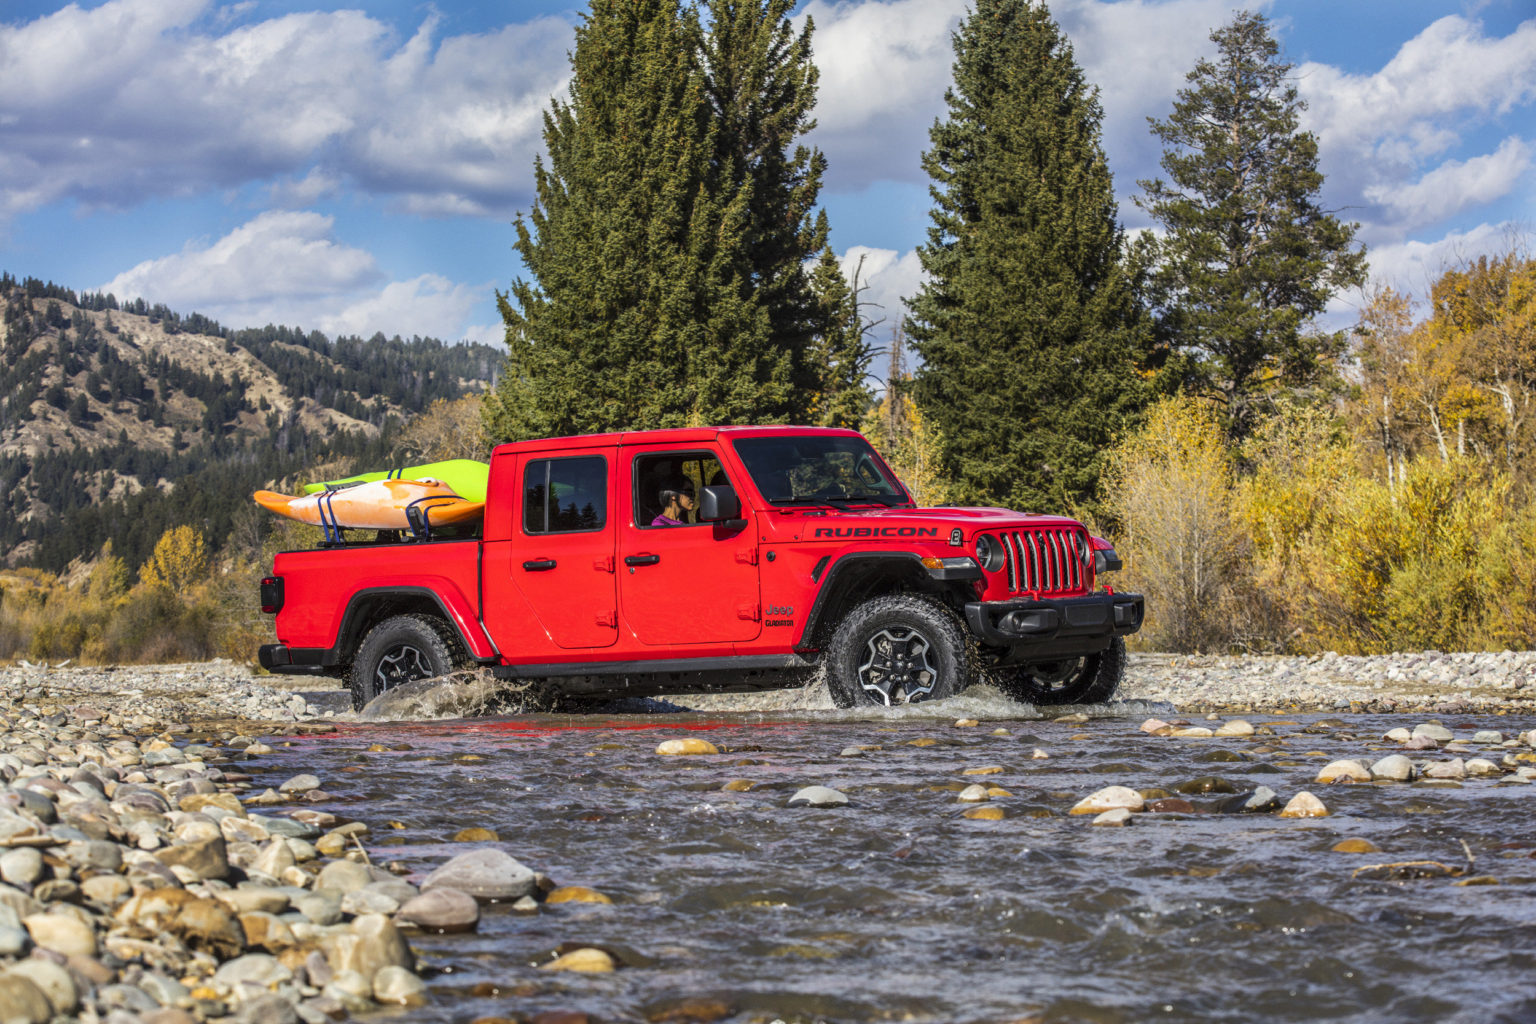 The Jeep Gladiator may be a little over-engineered but that just makes it more fun.